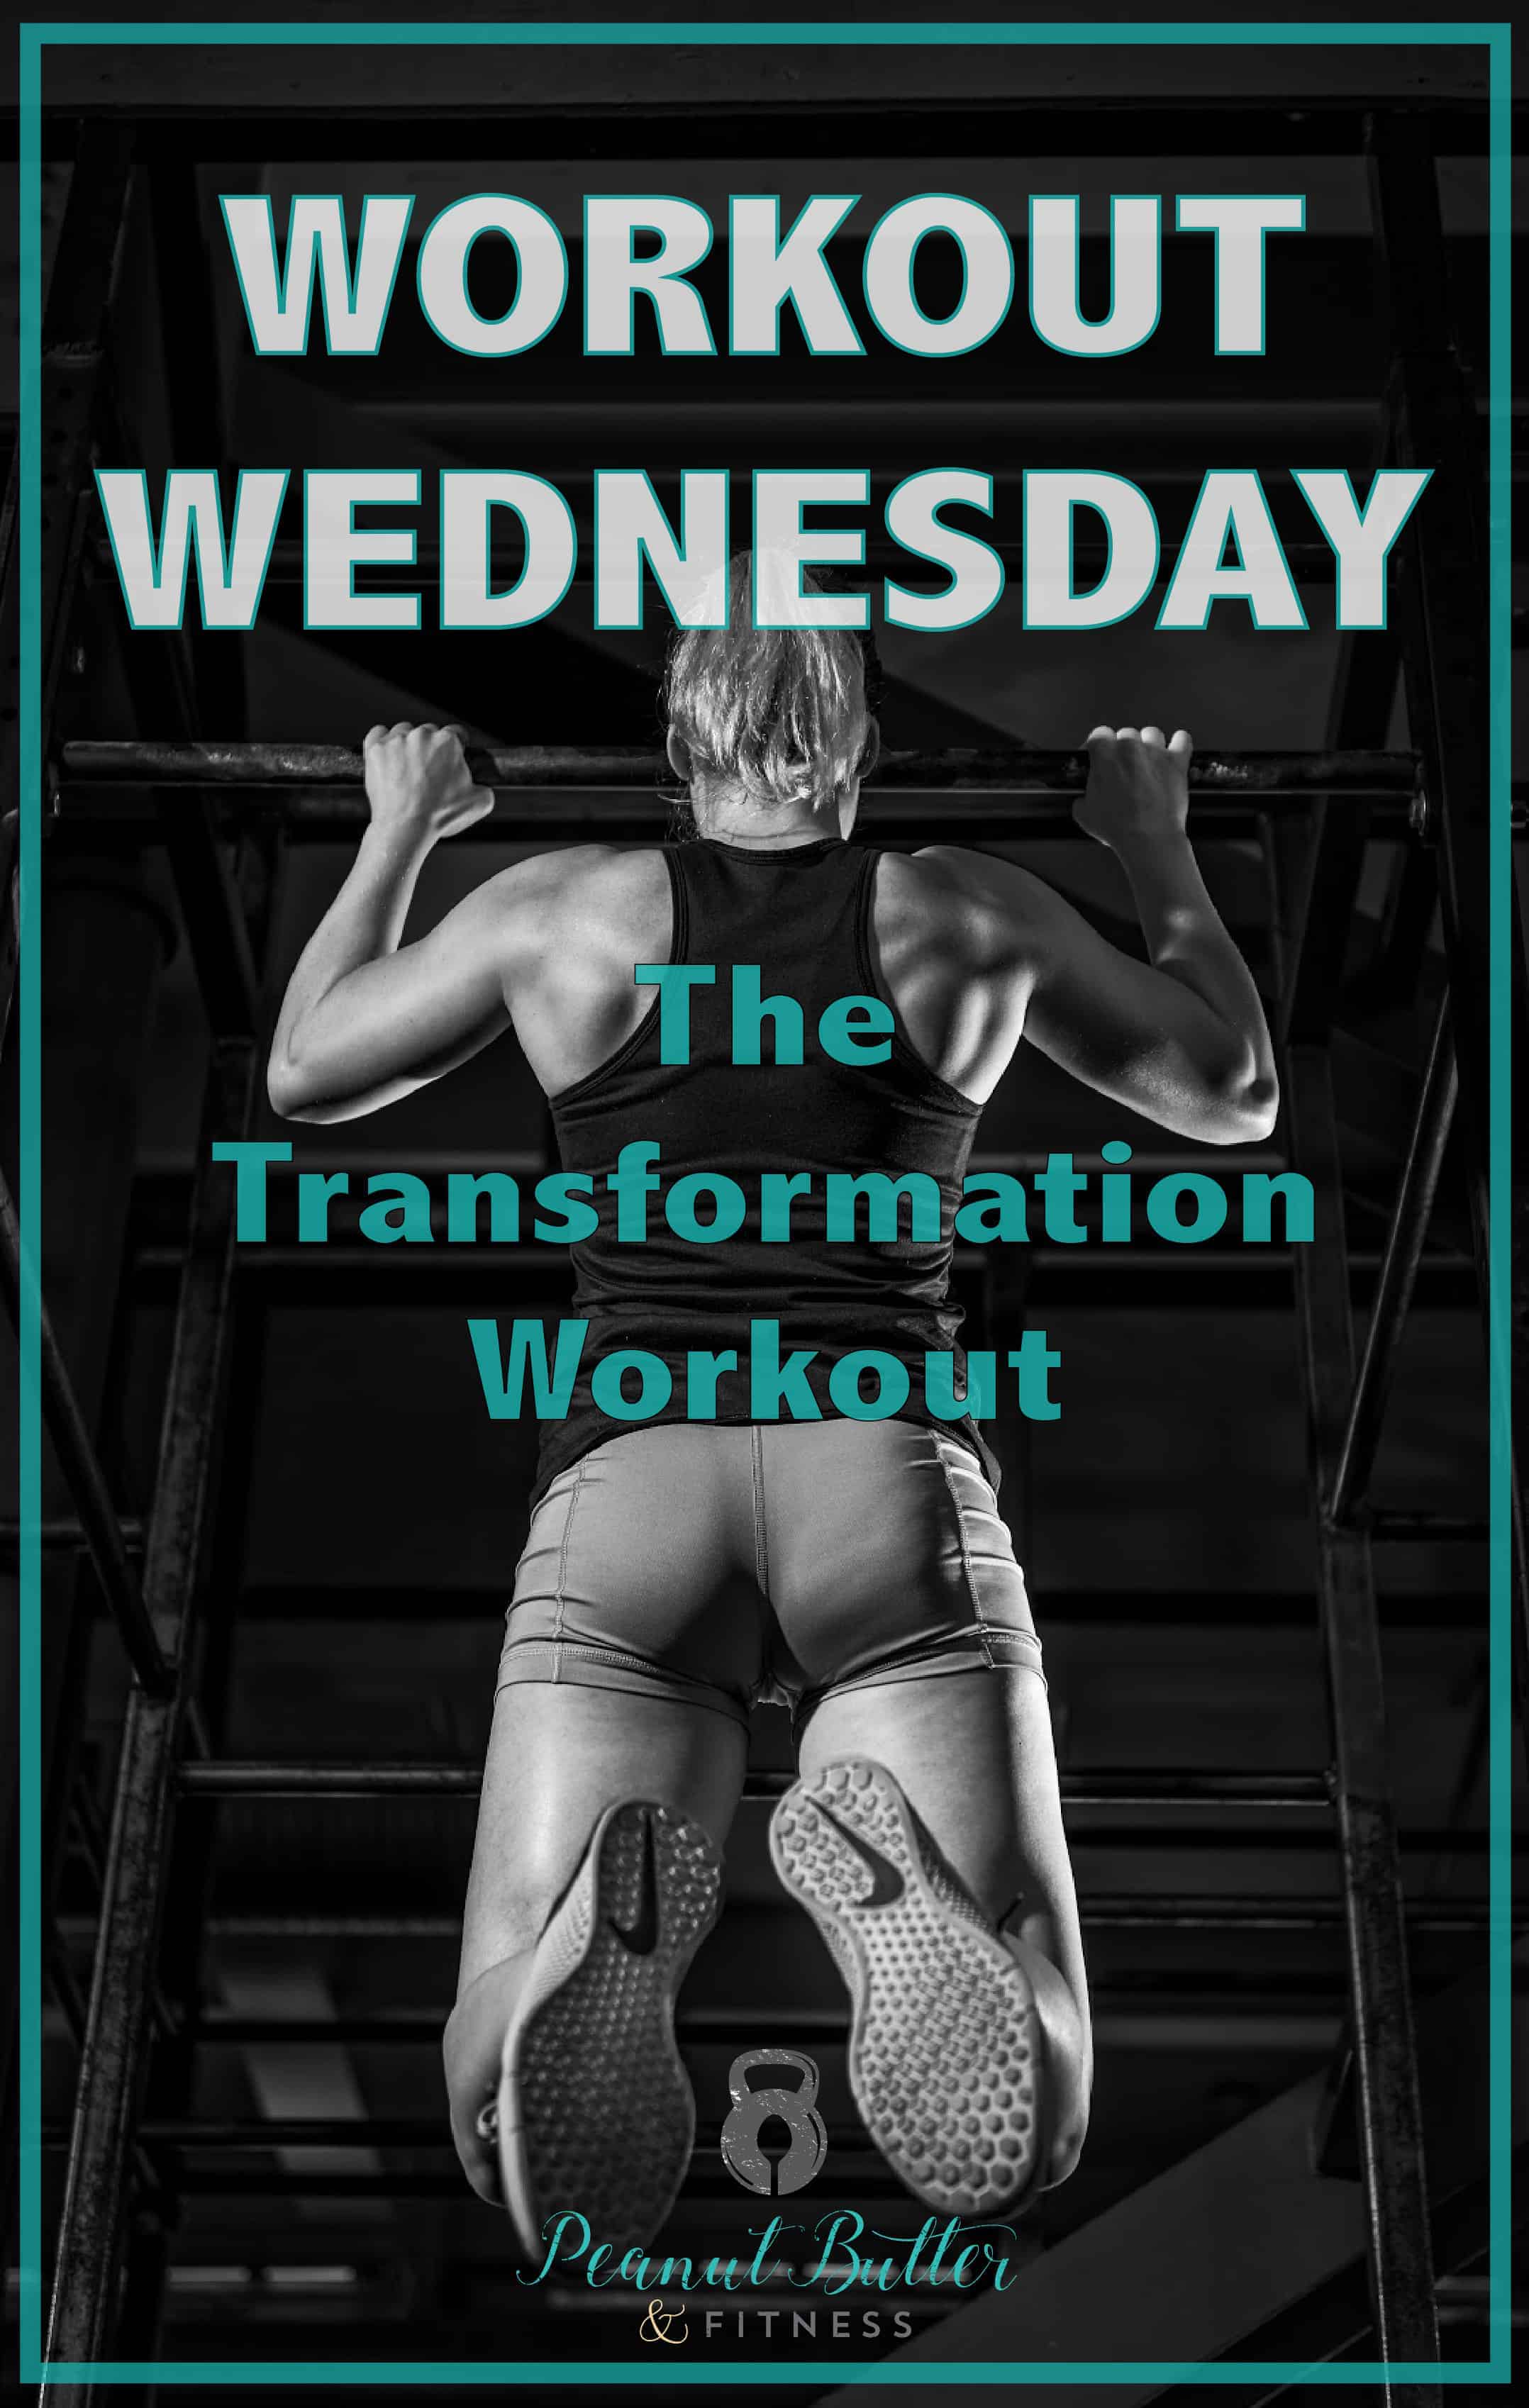 Workout wednesday - the transformation workout-01